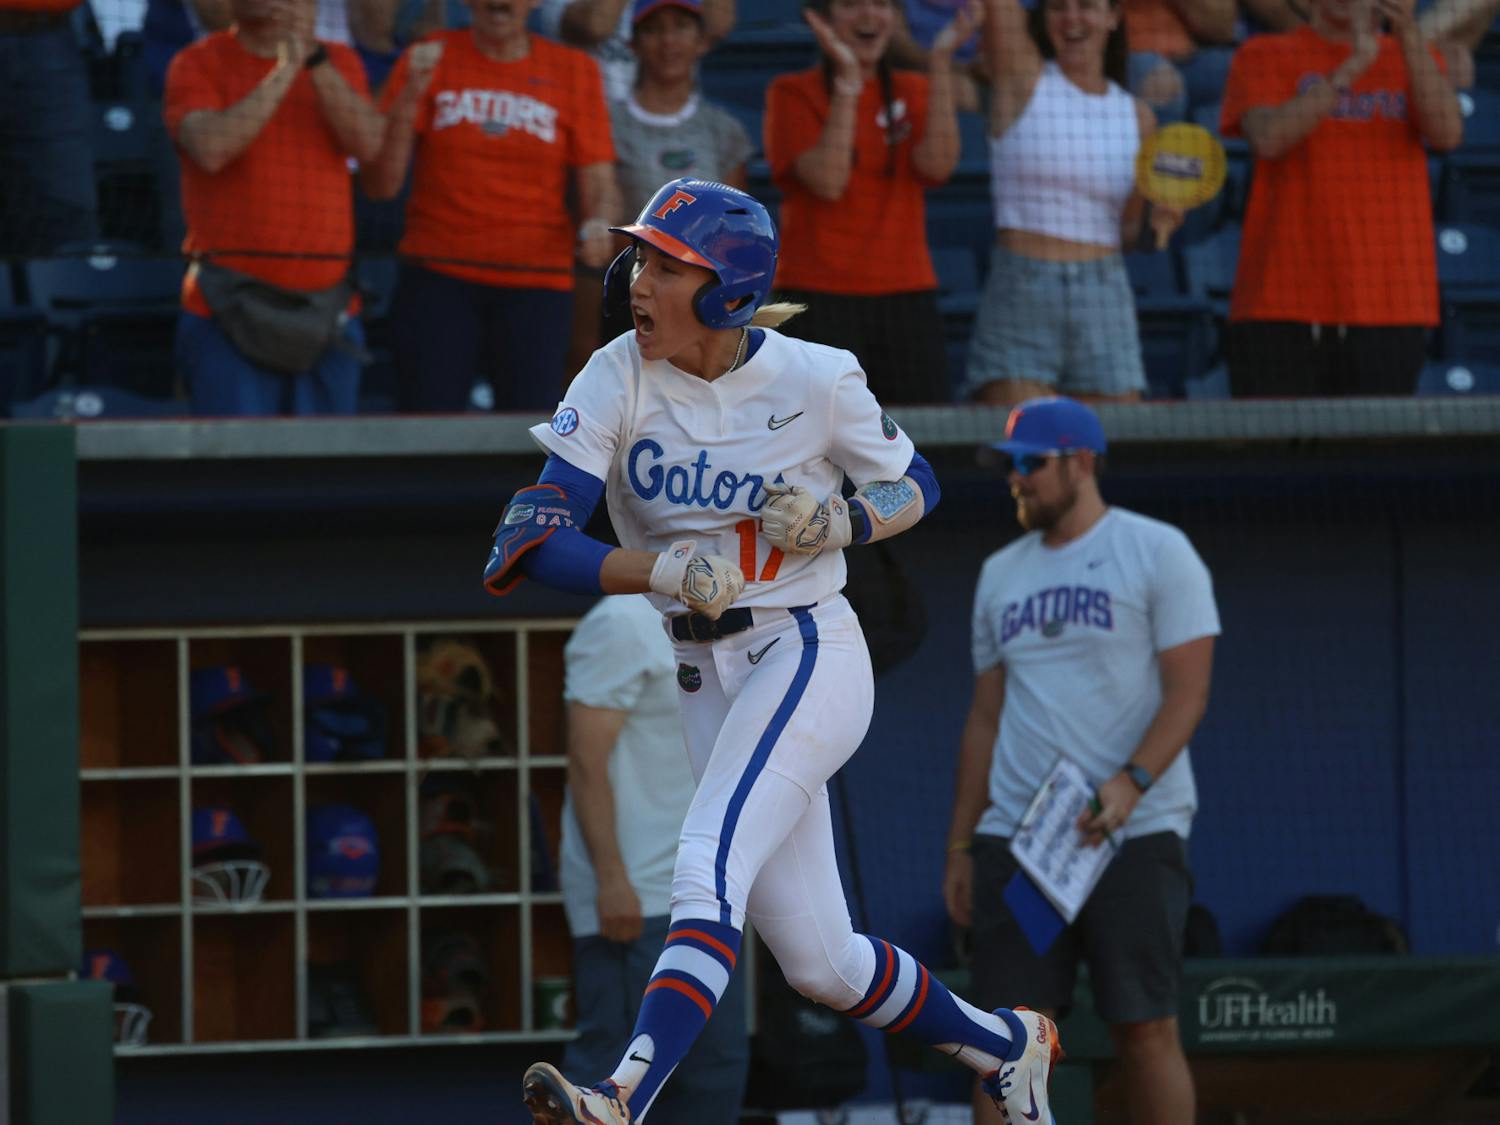 Florida shortstop Skylar Wallace runs toward home plate after her first of three home runs during the Gators' 13-4 win over the Georgia Bulldogs Friday, April 14, 2023.